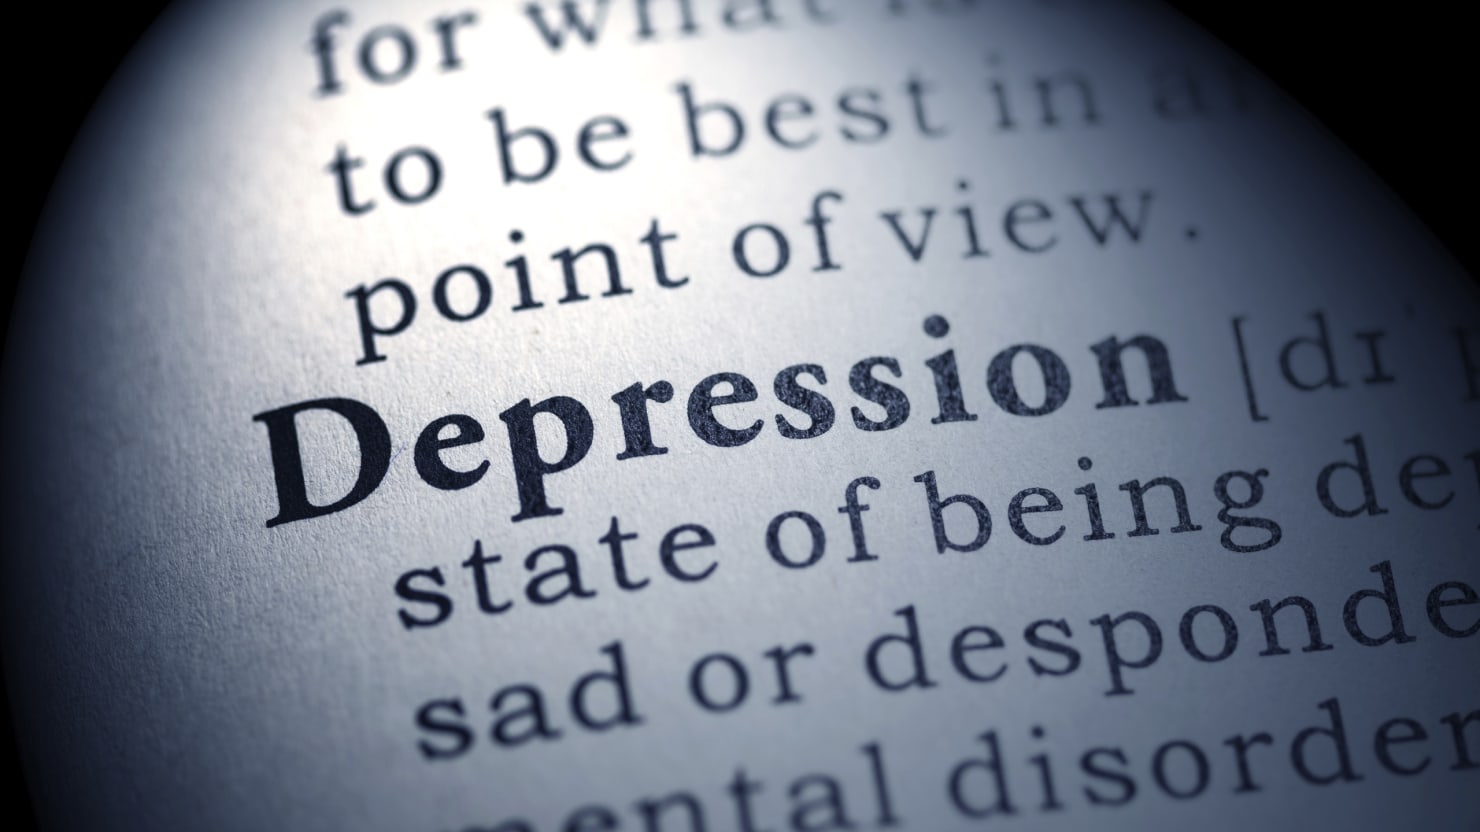 We’re Talking About Depression All Wrong